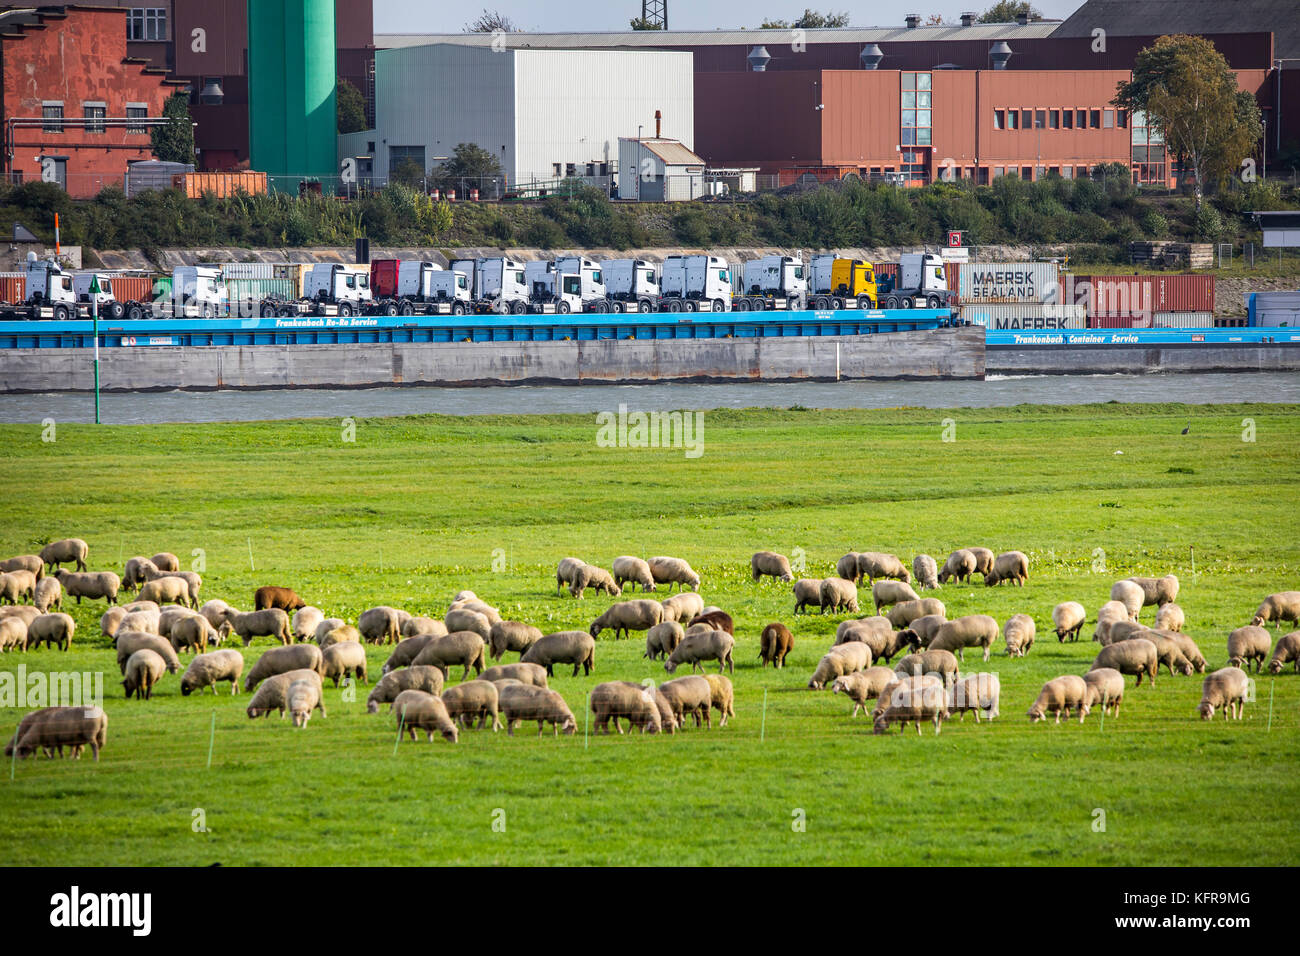 Rhine meadows,in Duisburg Hochemmerich, Germany, sheep, bridge over river Rhine, industry, river cargo ship, Stock Photo